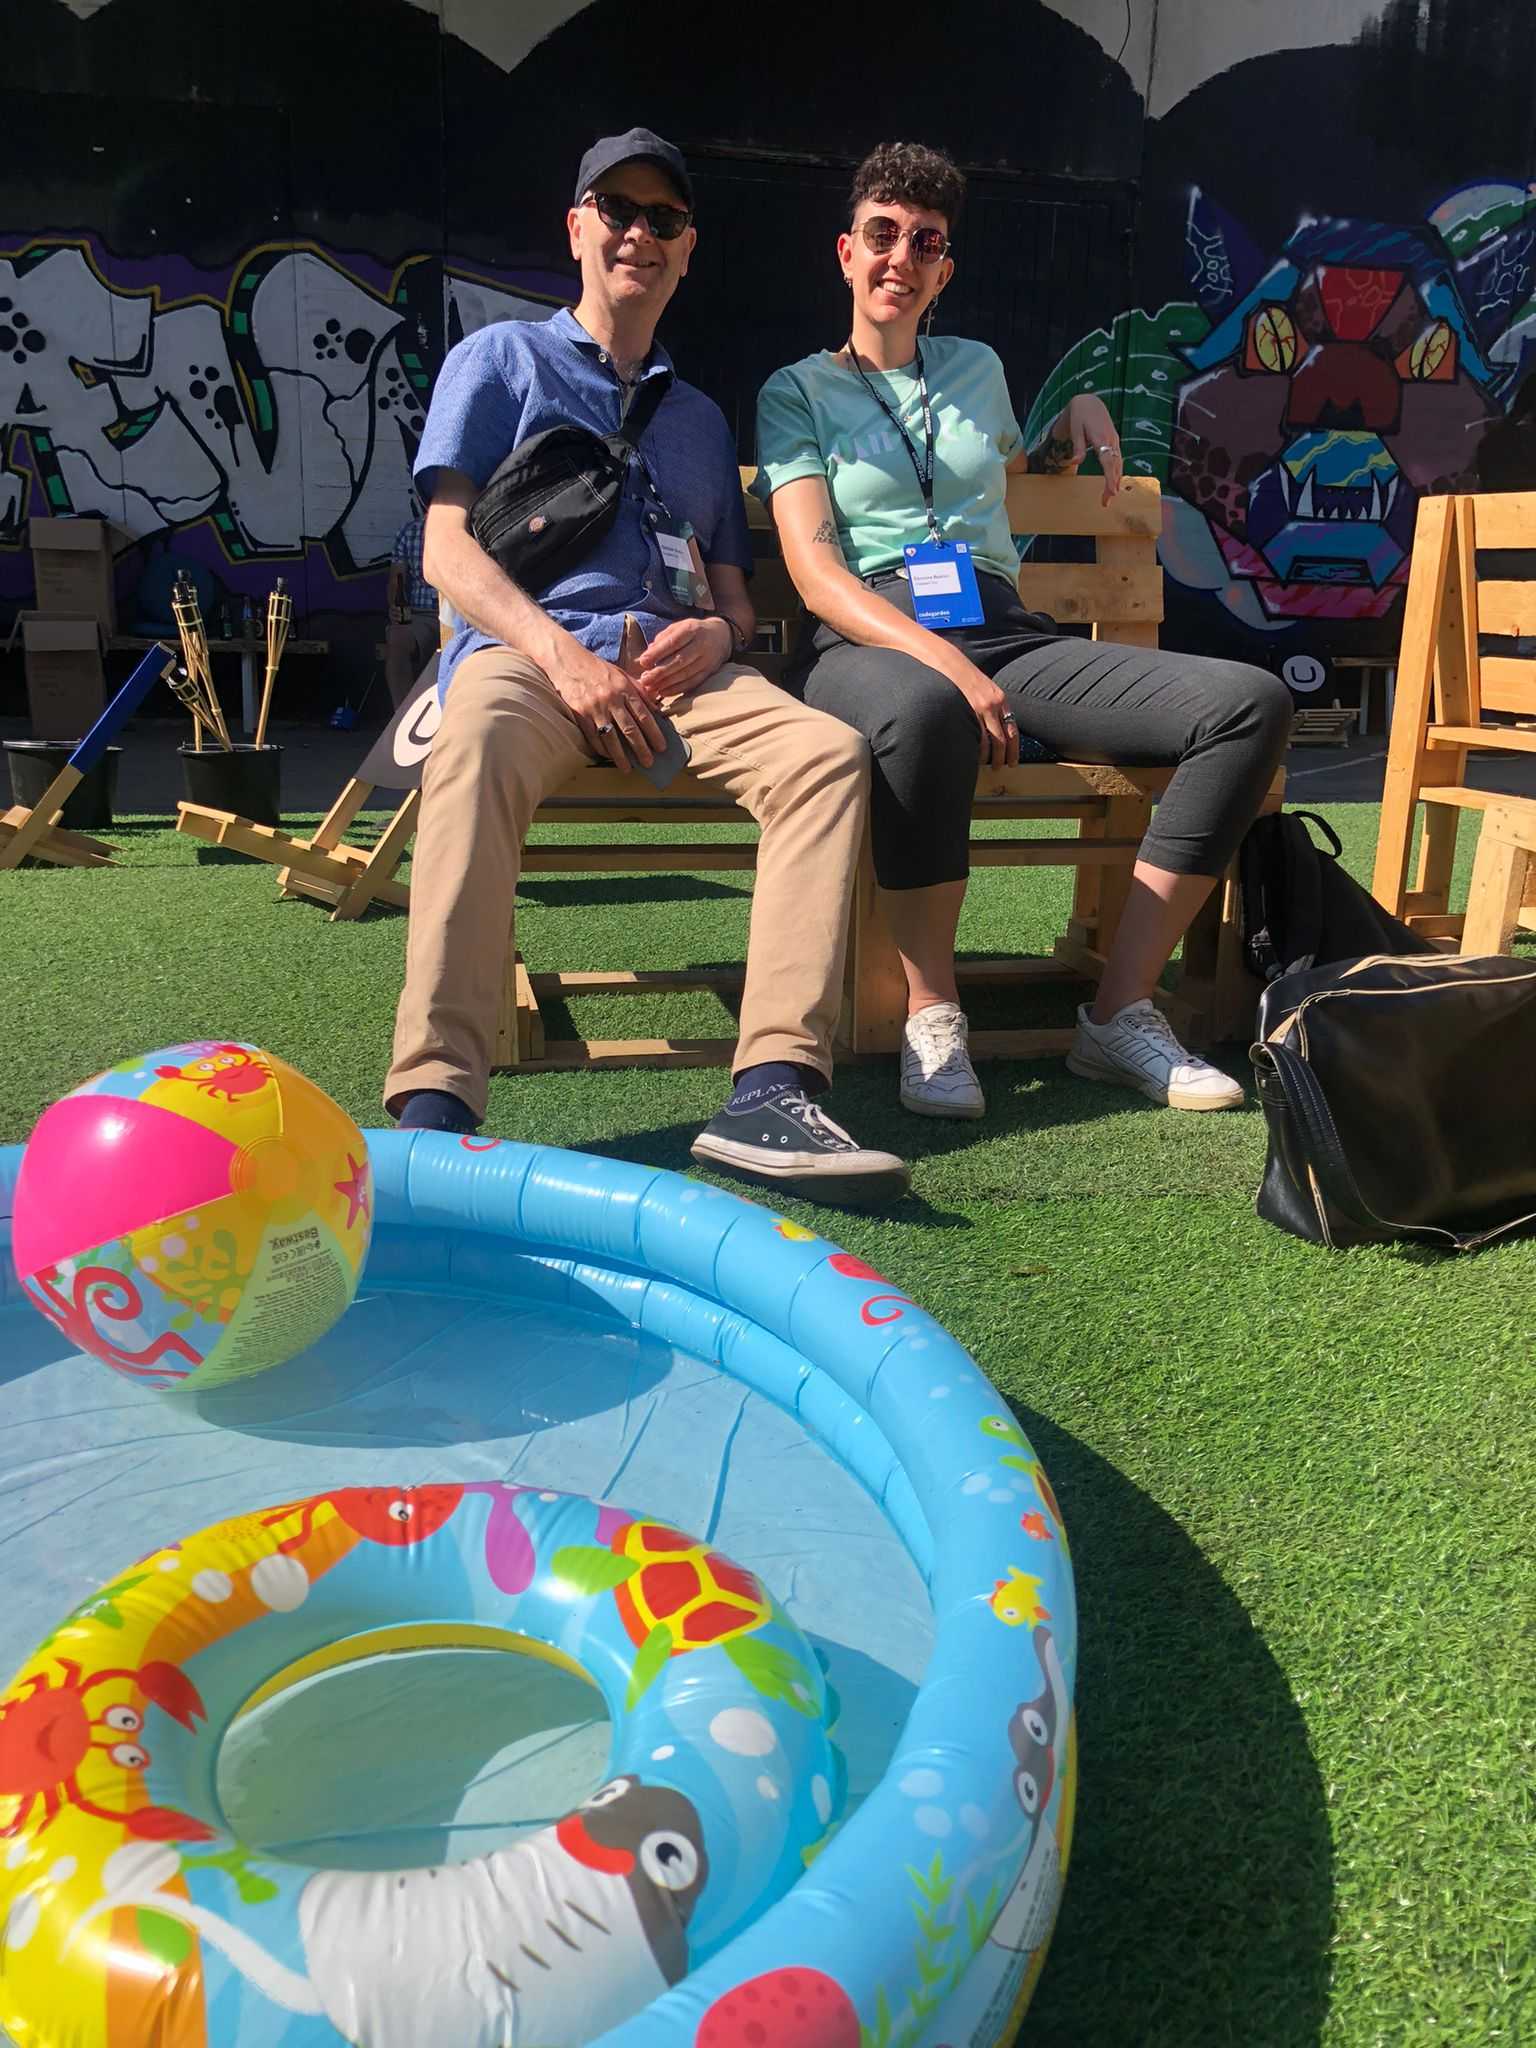 A picture of two people from Crumpled Dog sitting in the sun on a bench in the Codegarden outdoor section, next to a blue paddling pool with colourful inflatables. They are wearing sunglasses and smiling.